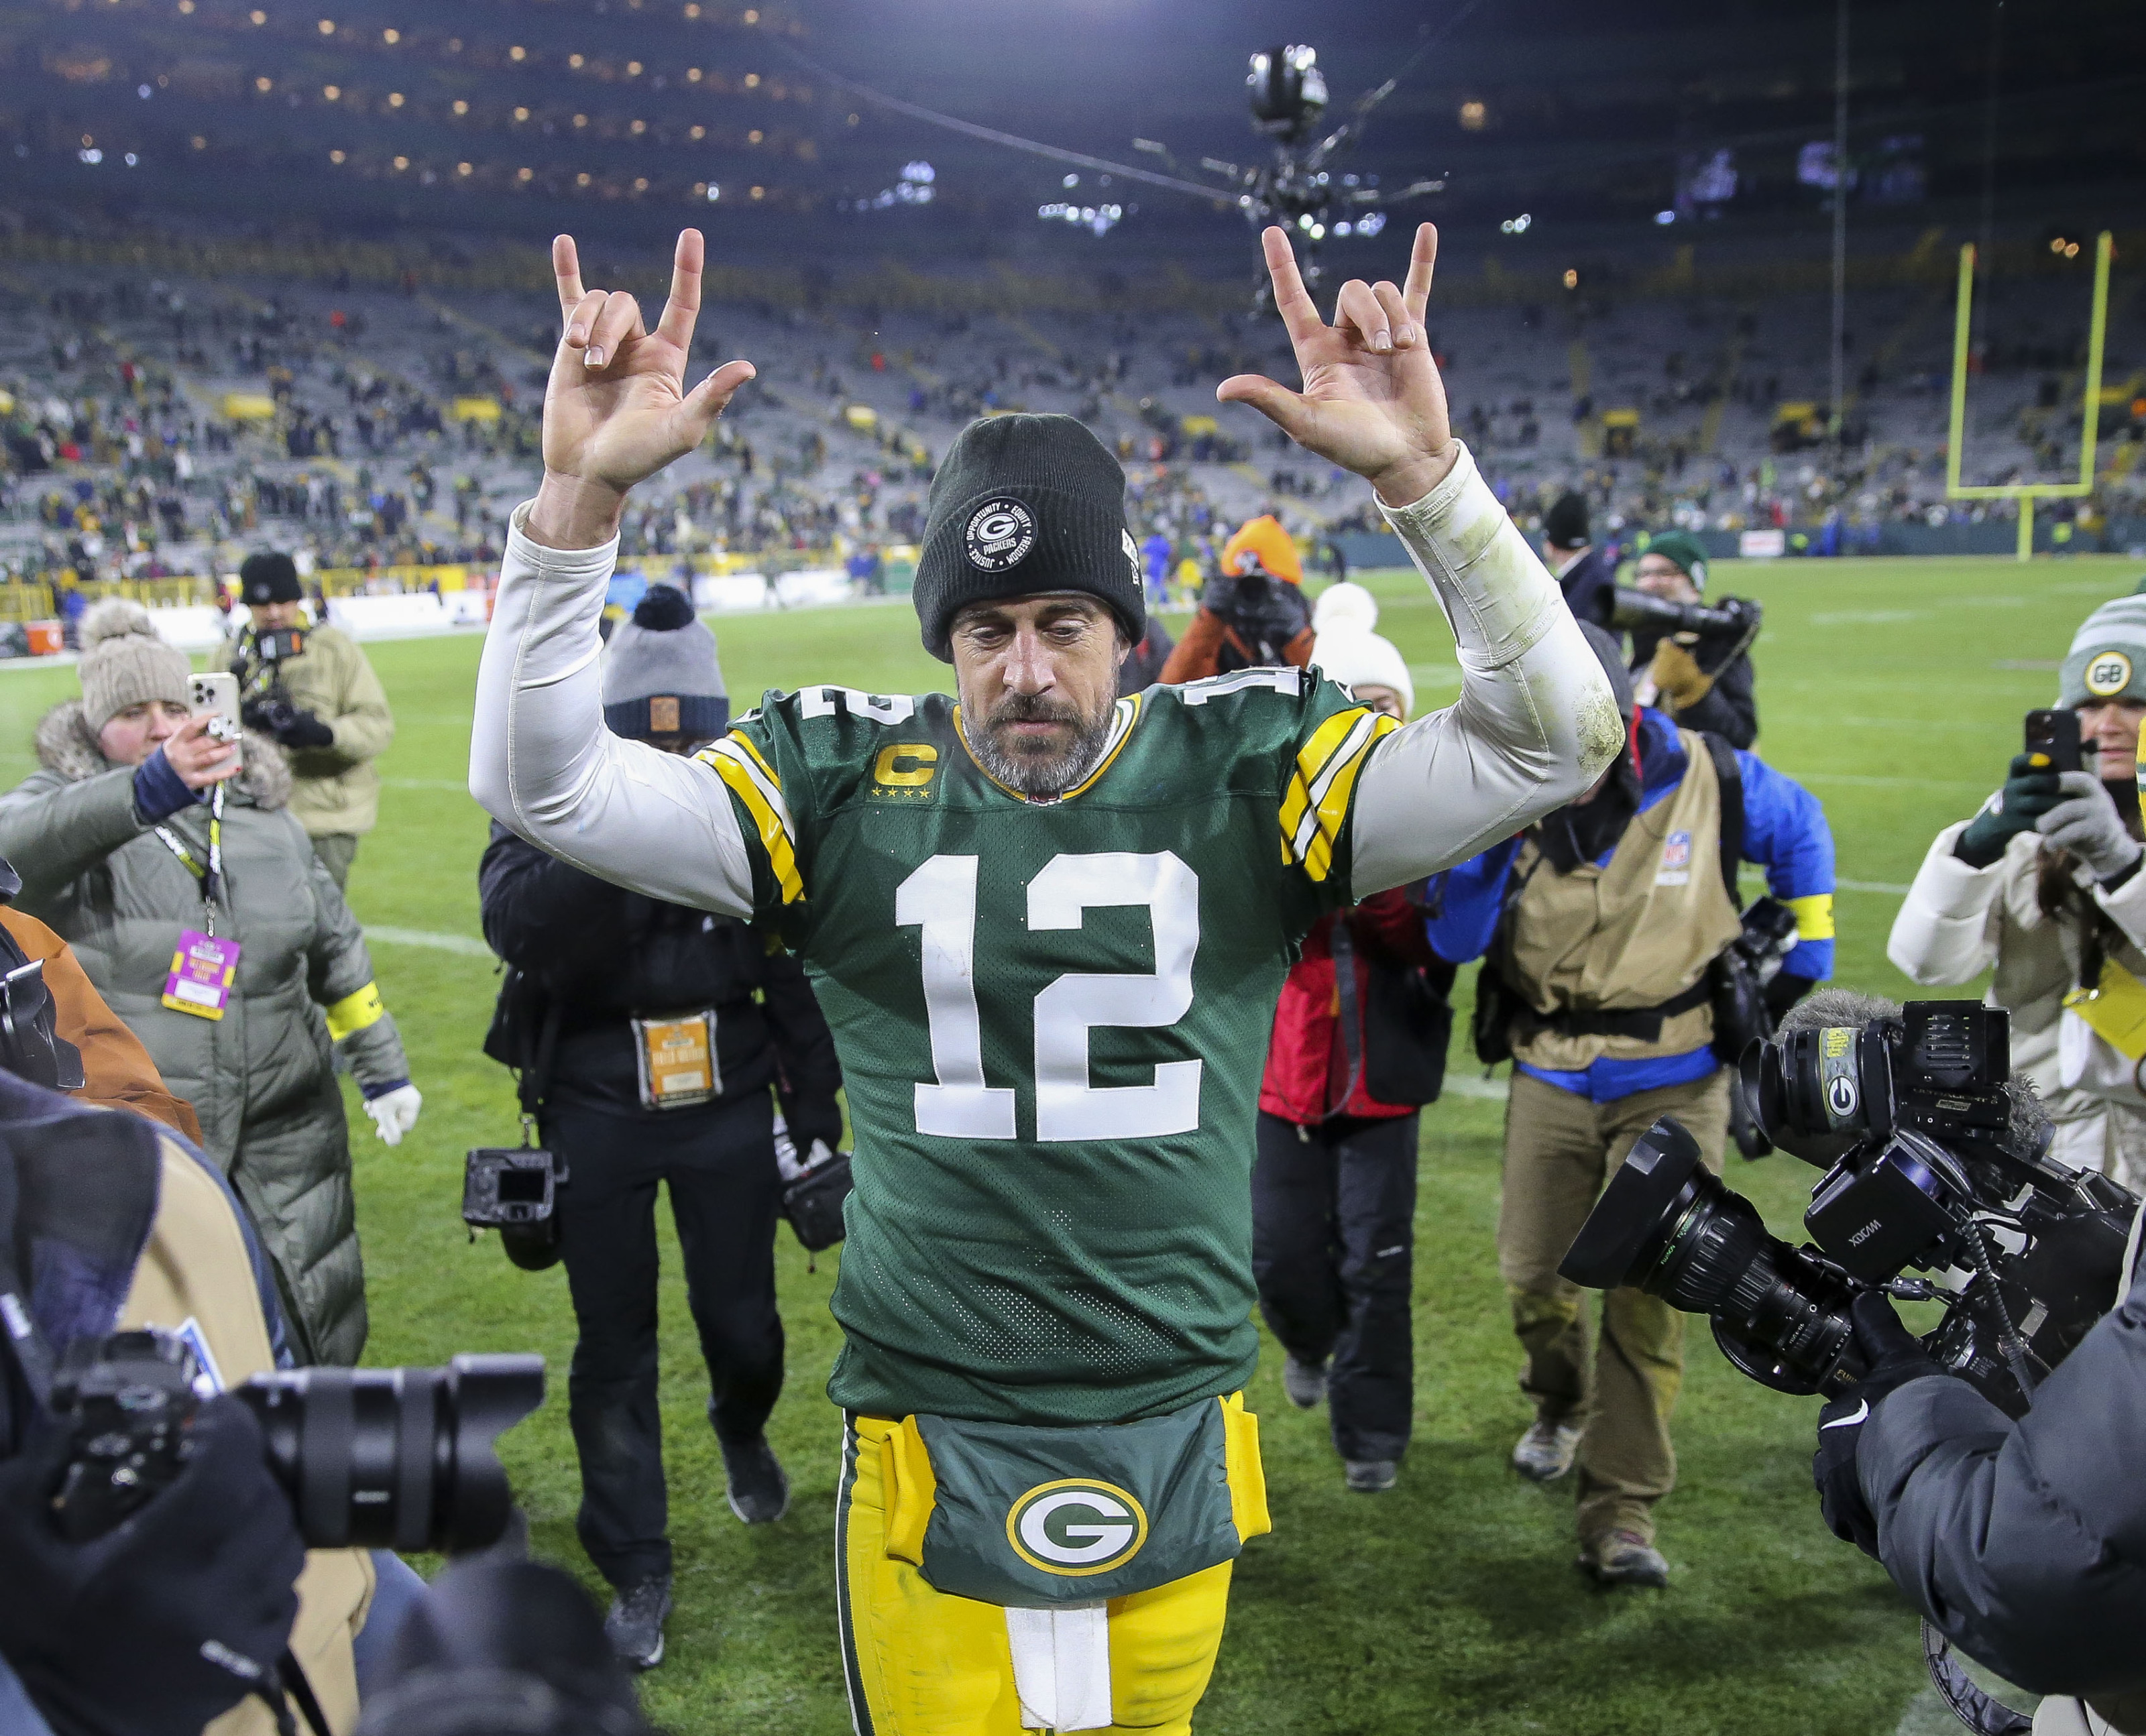 Breaking: Packers trade QB Aaron Rodgers to New York Jets